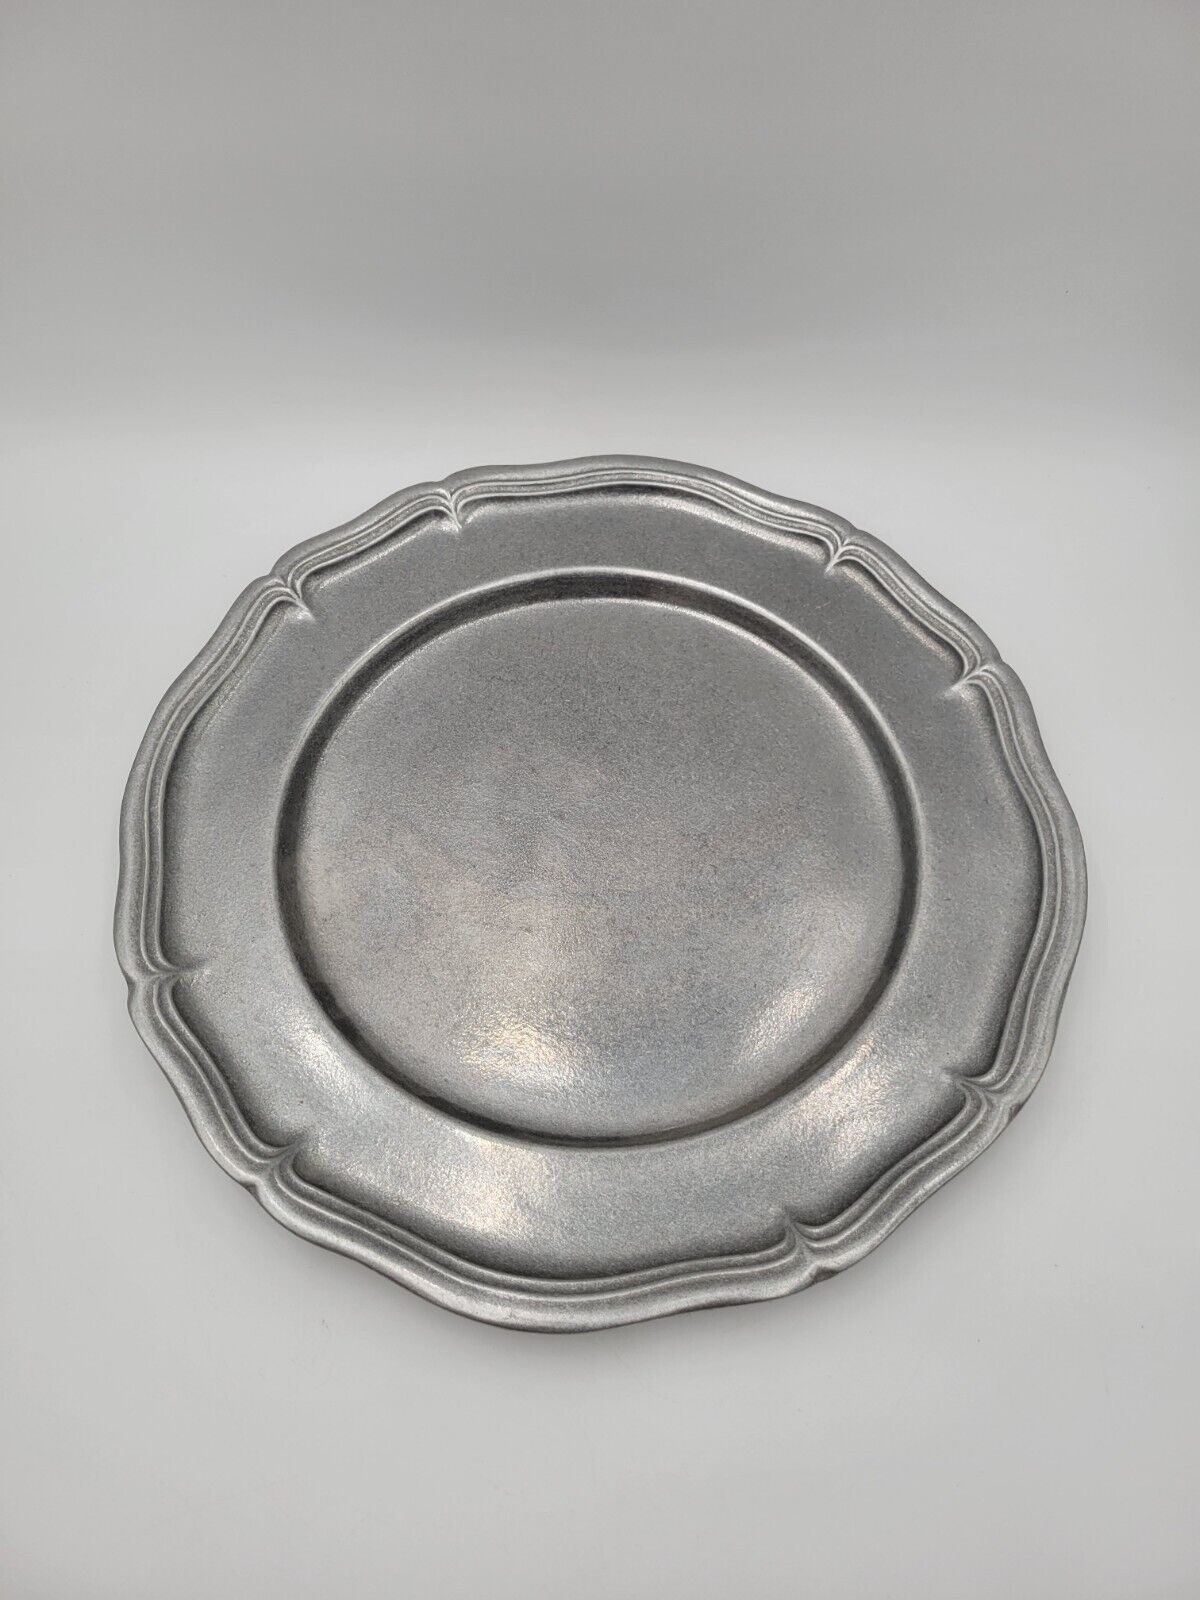 Wilton Armetale Pewter Queen Anne Round Platter Tray Charger Silver Color 